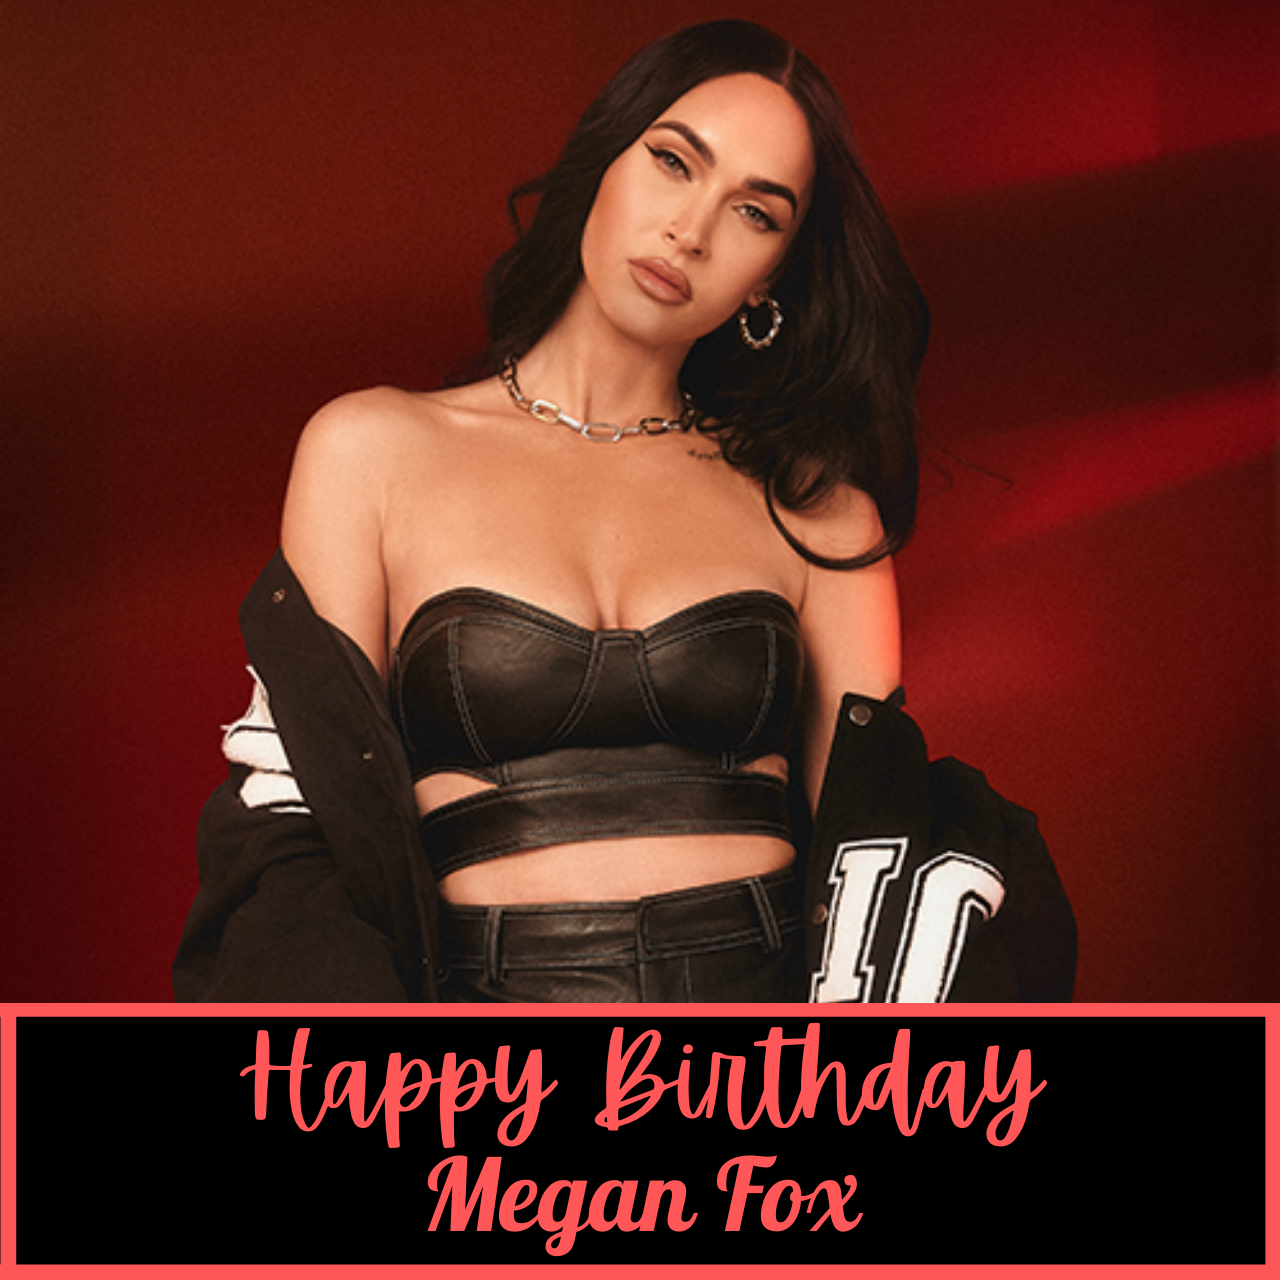 Happy Birthday Megan Fox: Wishes, Quotes, Images, Messages, and Memes to greet 'Foxy Megan'